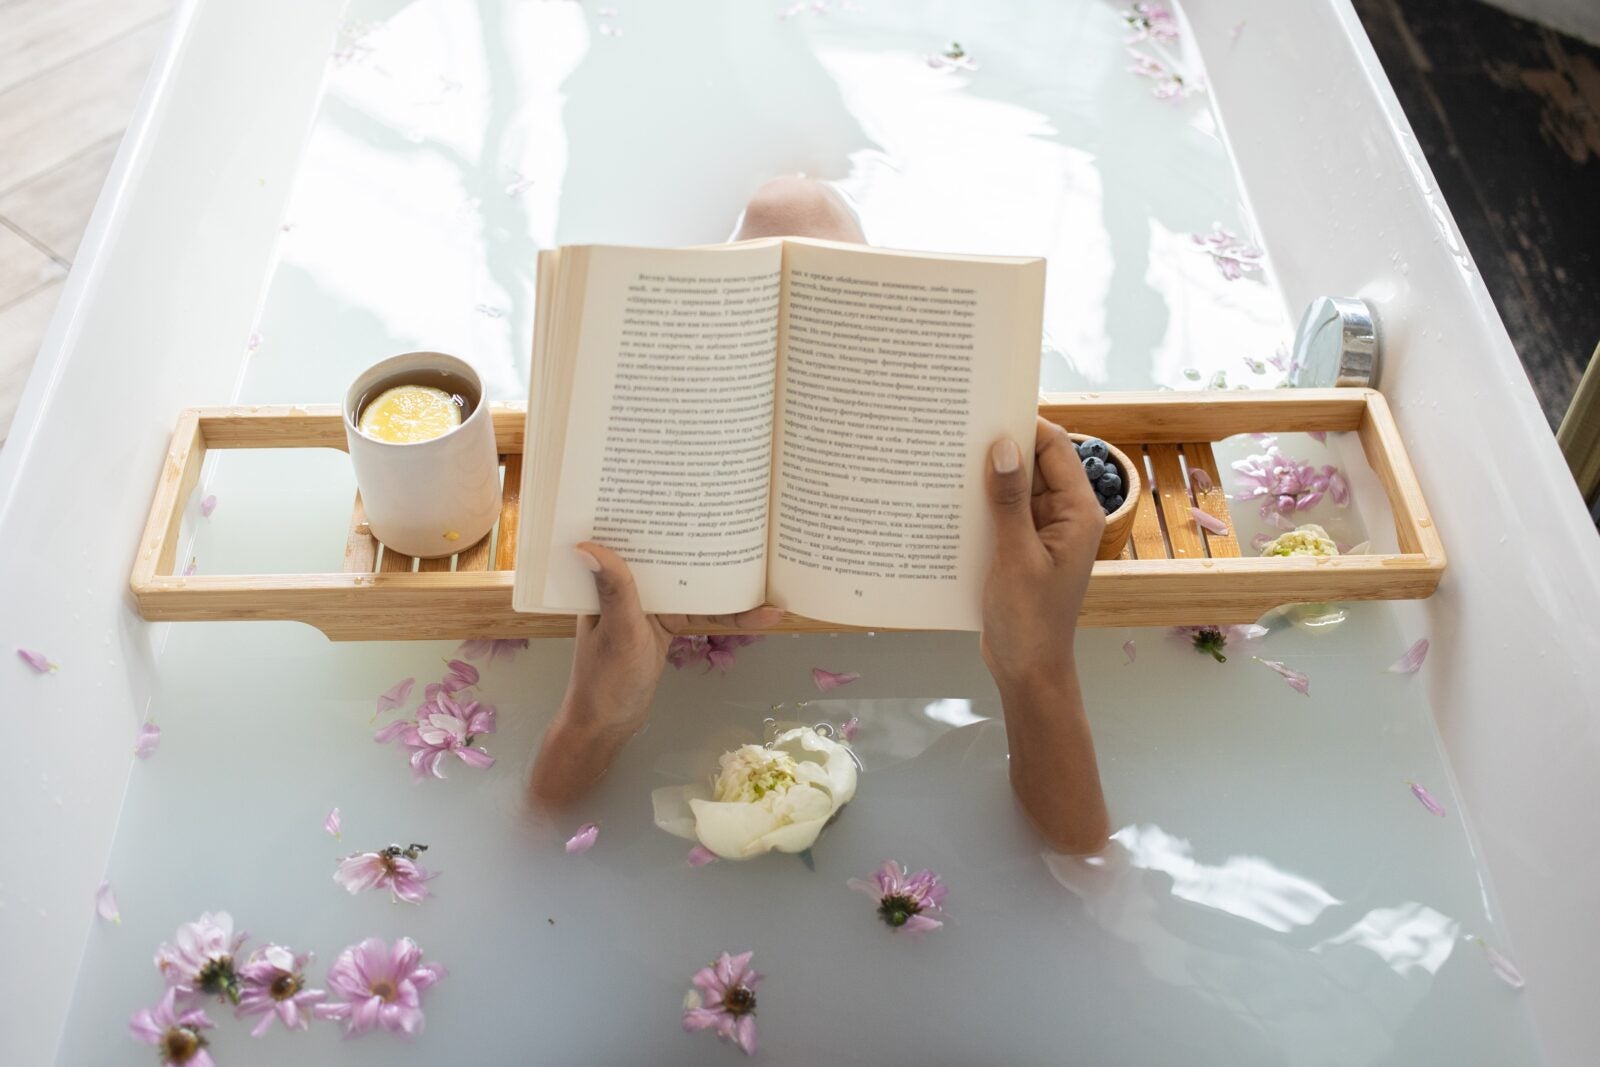 A pair of hands hold a book in a filled bathtub with a wooden platter holding a cup of coffee. There are flowers in the bathwater and the milkiness covers the person's body.